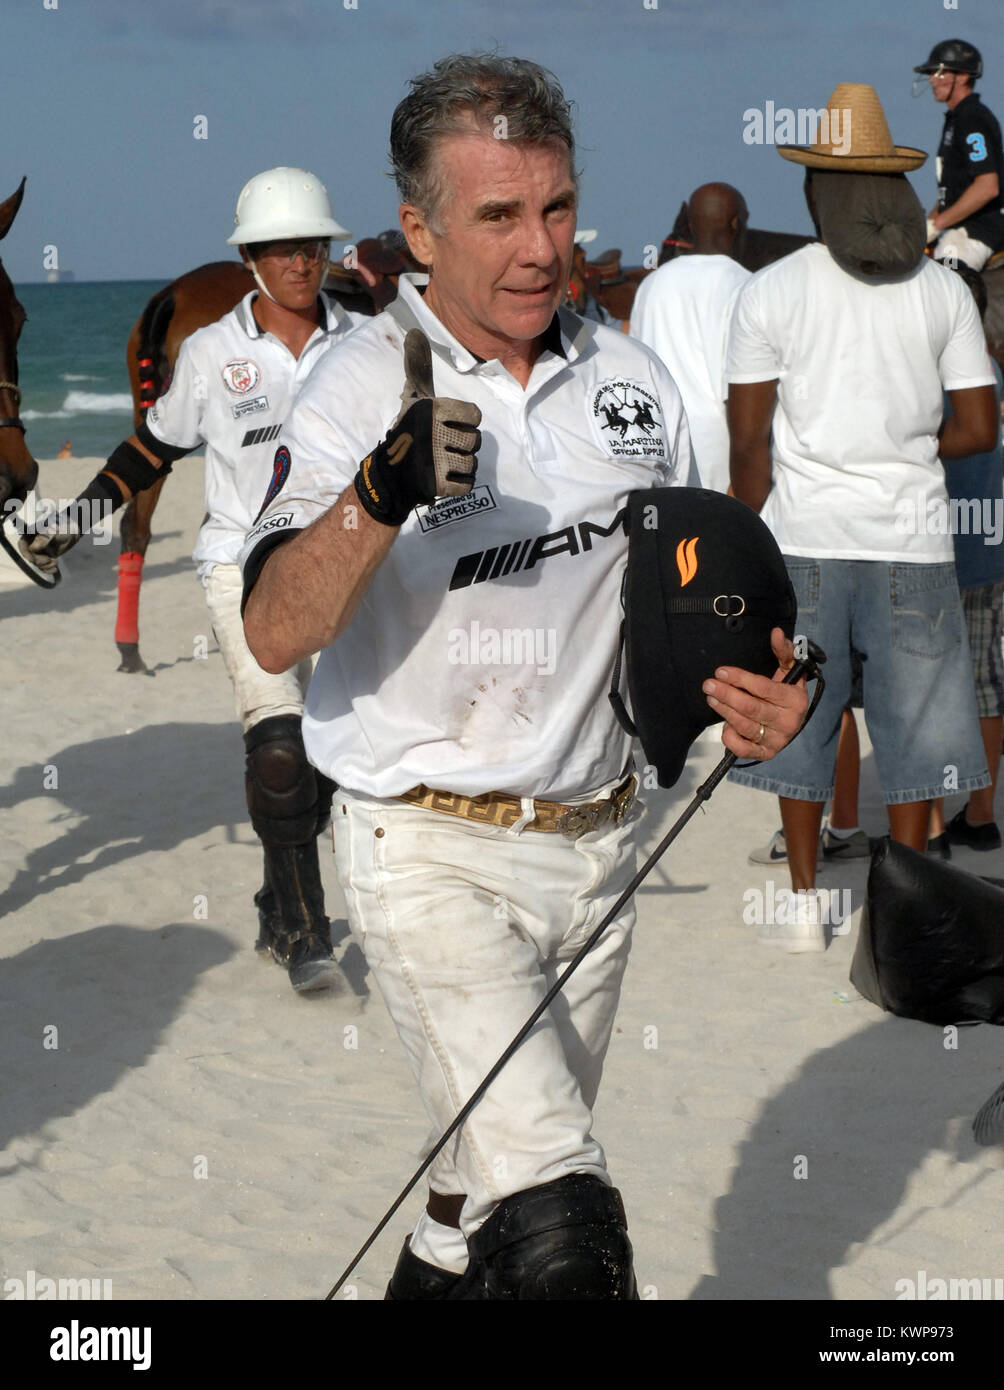 MIAMI BEACH, FL - APRIL 22:  'America's Most Wanted' host John Walsh attends AMG Miami Beach Polo World Cup - Twenty-eight-year-old Meghan Walsh also attended the event to support her dad and showcase her own fashion designs.  John Edward Walsh (born December 26, 1945) is an American television personality, criminal investigator, human and victim rights advocate and the host of America's Most Wanted. Walsh is known for his anti-crime activism, which he became involved with following the murder of his son, Adam, in 1981; in 2008, the now deceased serial killer Ottis Toole was named as the kille Stock Photo